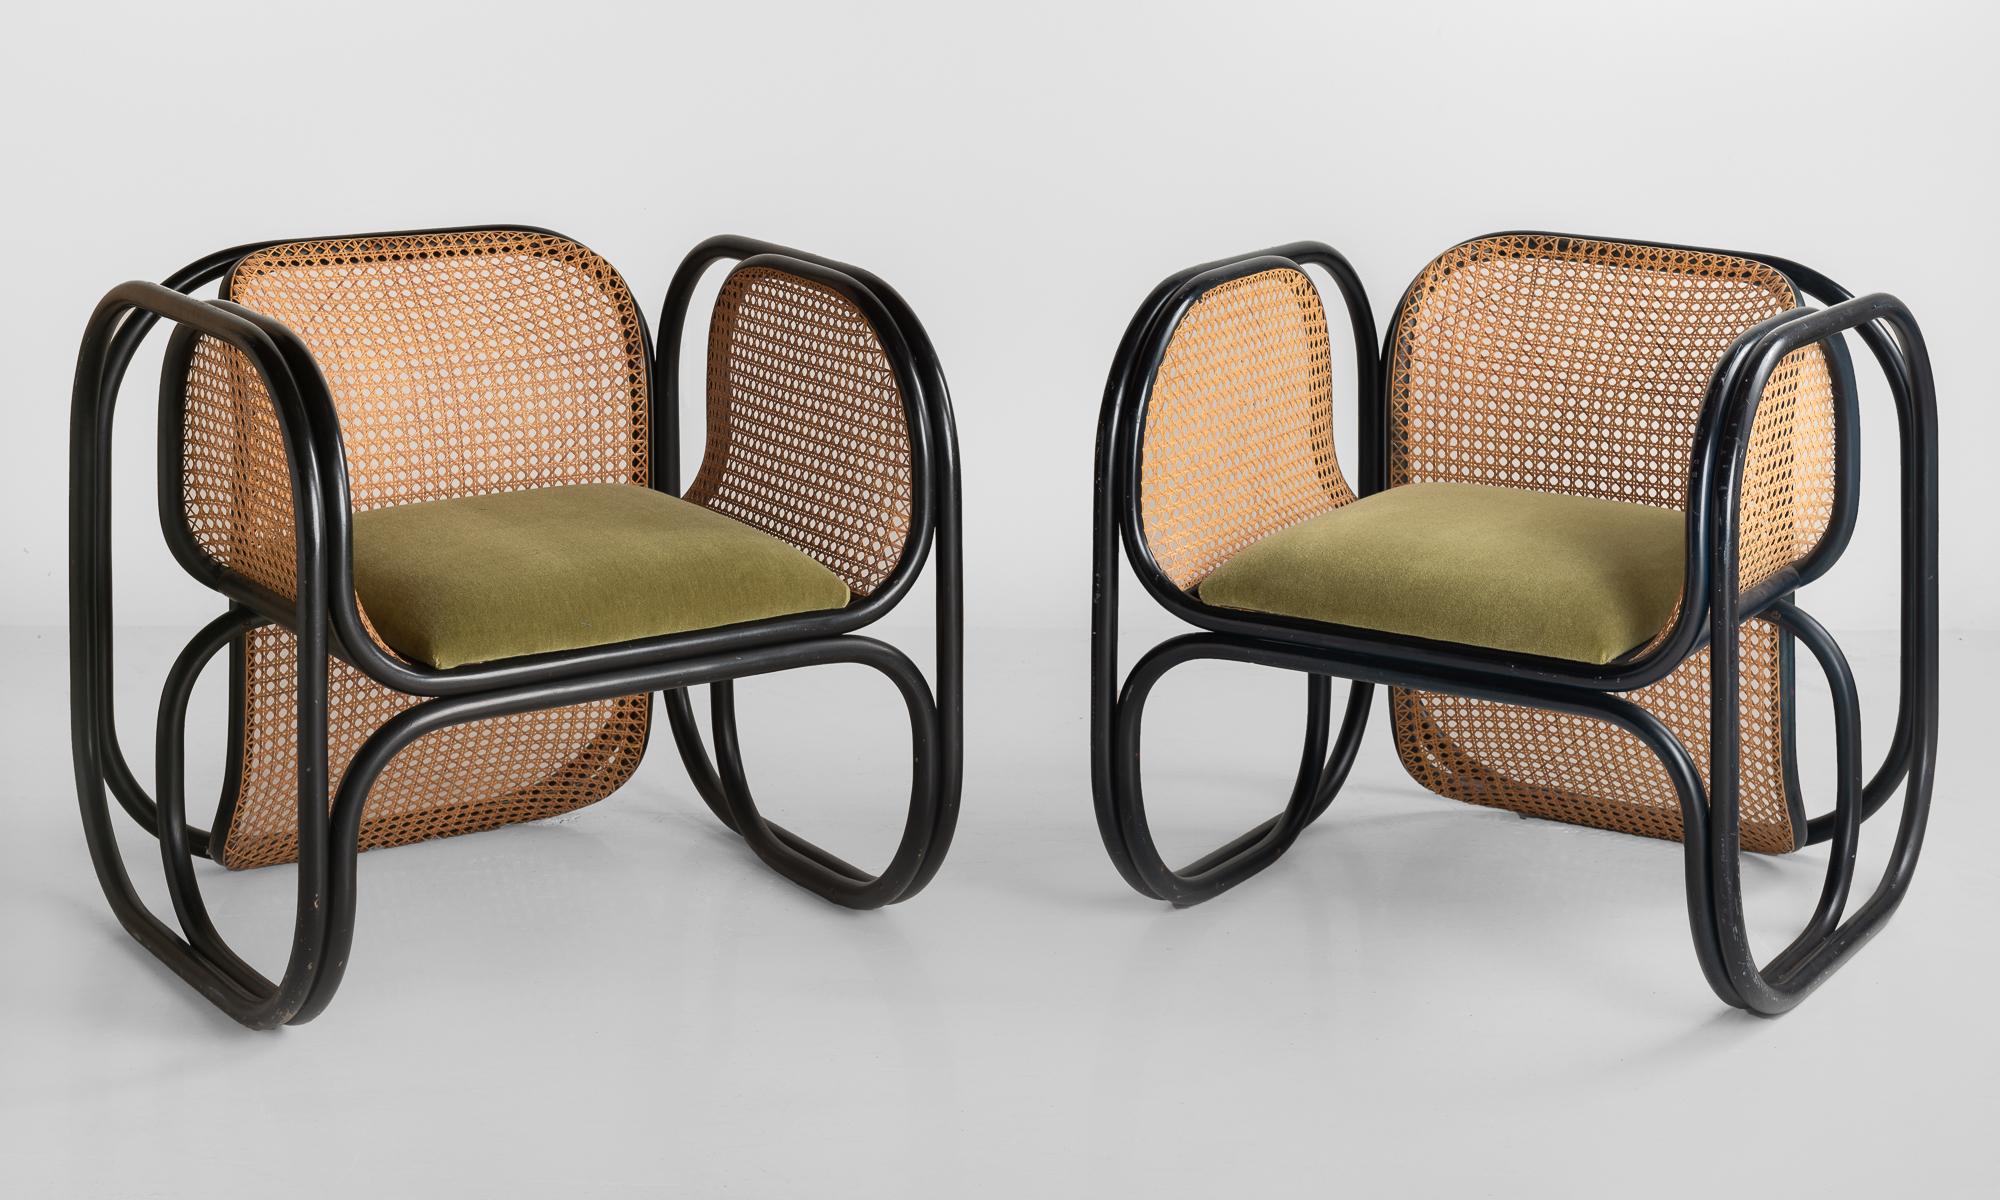 Pair of Jan Bocan armchairs, Czech Republic, circa 1970.

Produced by Thonet, designed for the Czech Embassy of Stockholm. One pair of the 60 armchairs produced. Ebonized bentwood frame with cane webbing on back and sides. Seat is upholstered in